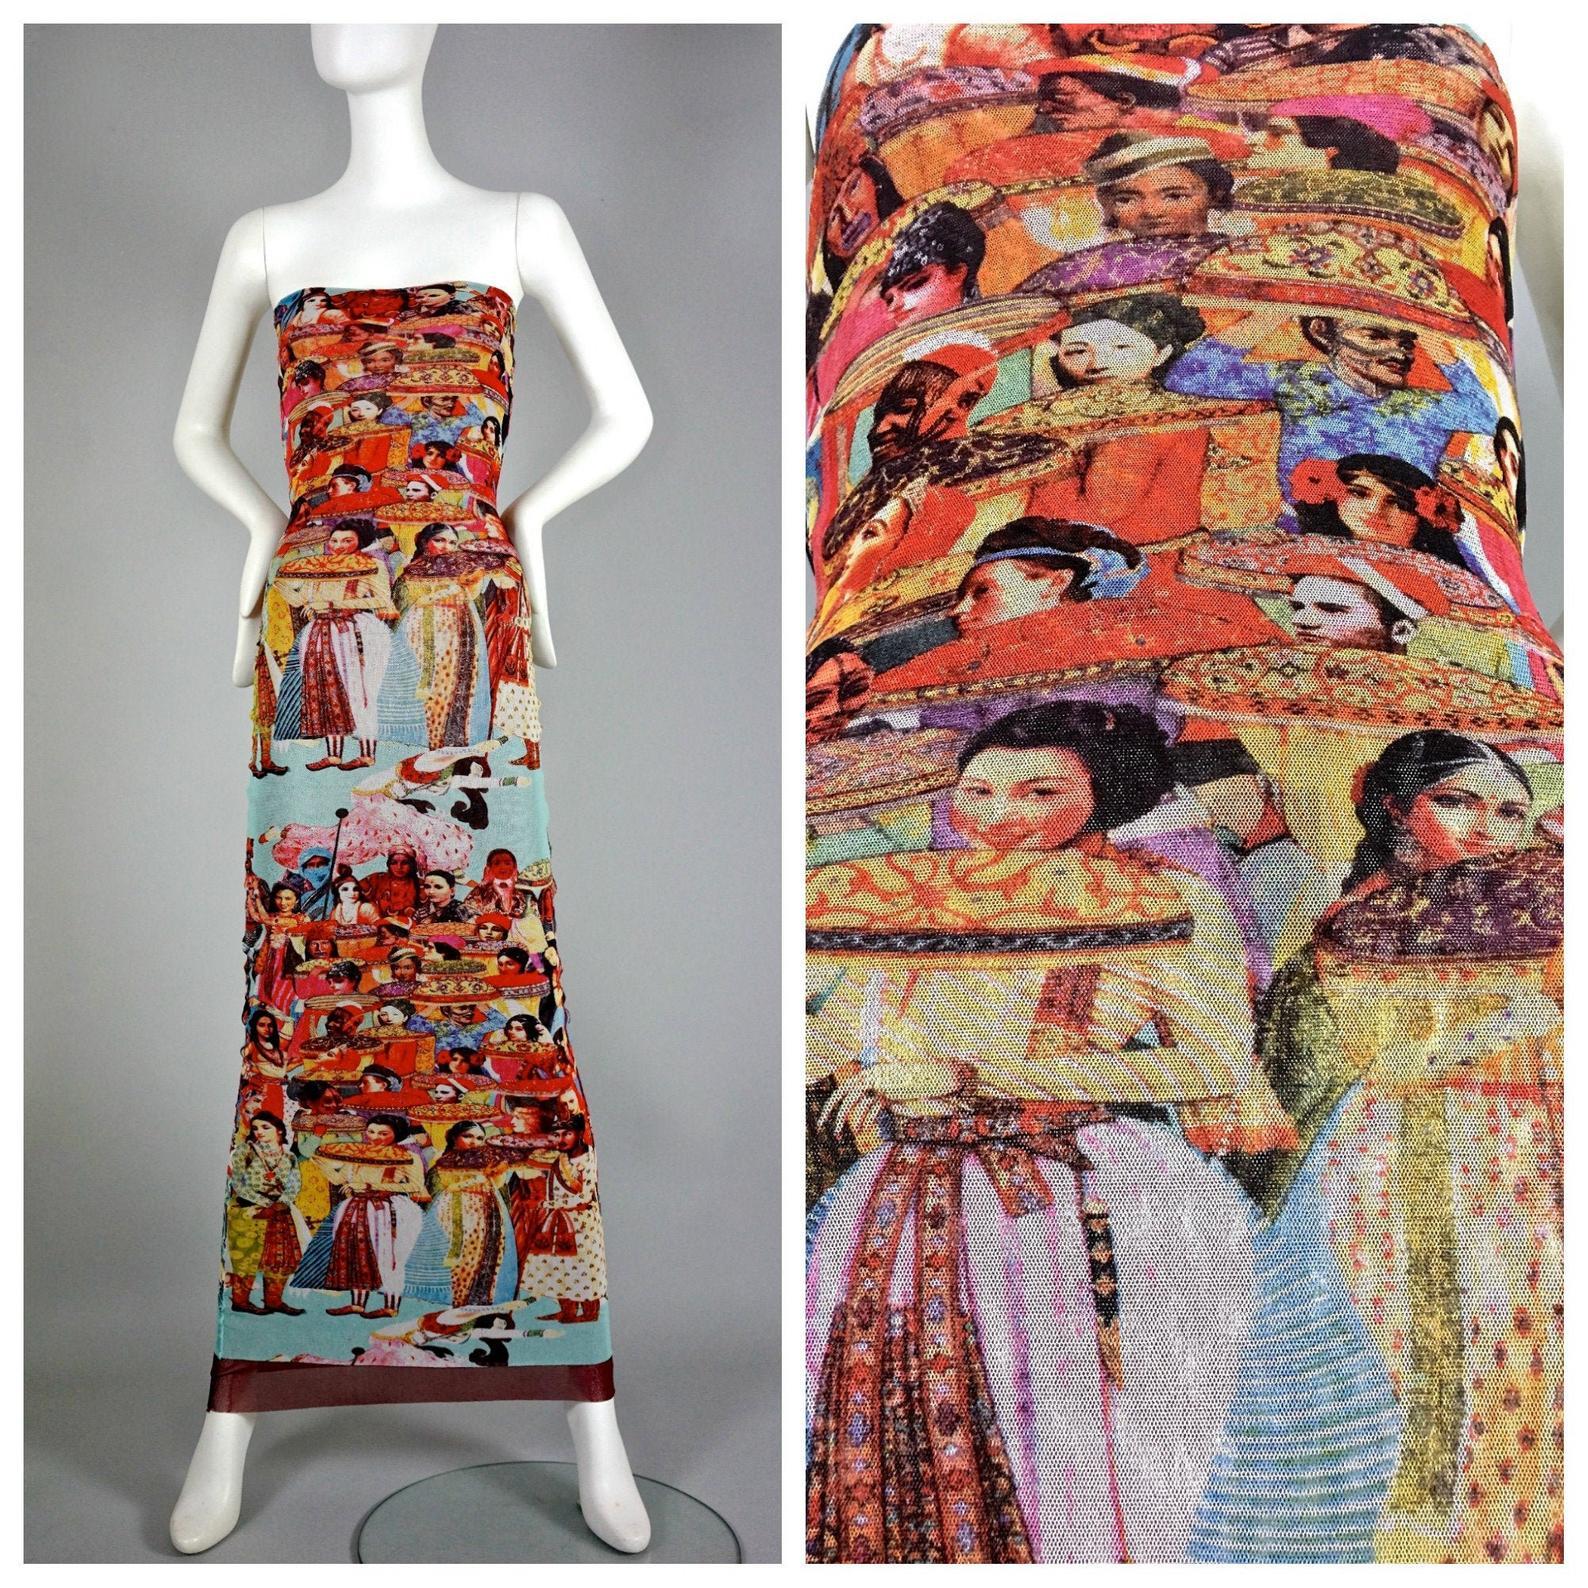 Vintage JEAN PAUL GAULTIER Vibrant Asian Print Tube Maxi Dress

Measurements taken laid flat, please double bust, wait and hips:
Bust: 11.42 inches (29 cm) without stretching
Waist: 10.63 inches (27 cm) without stretching
Hips: 15.75 inches (40 cm)